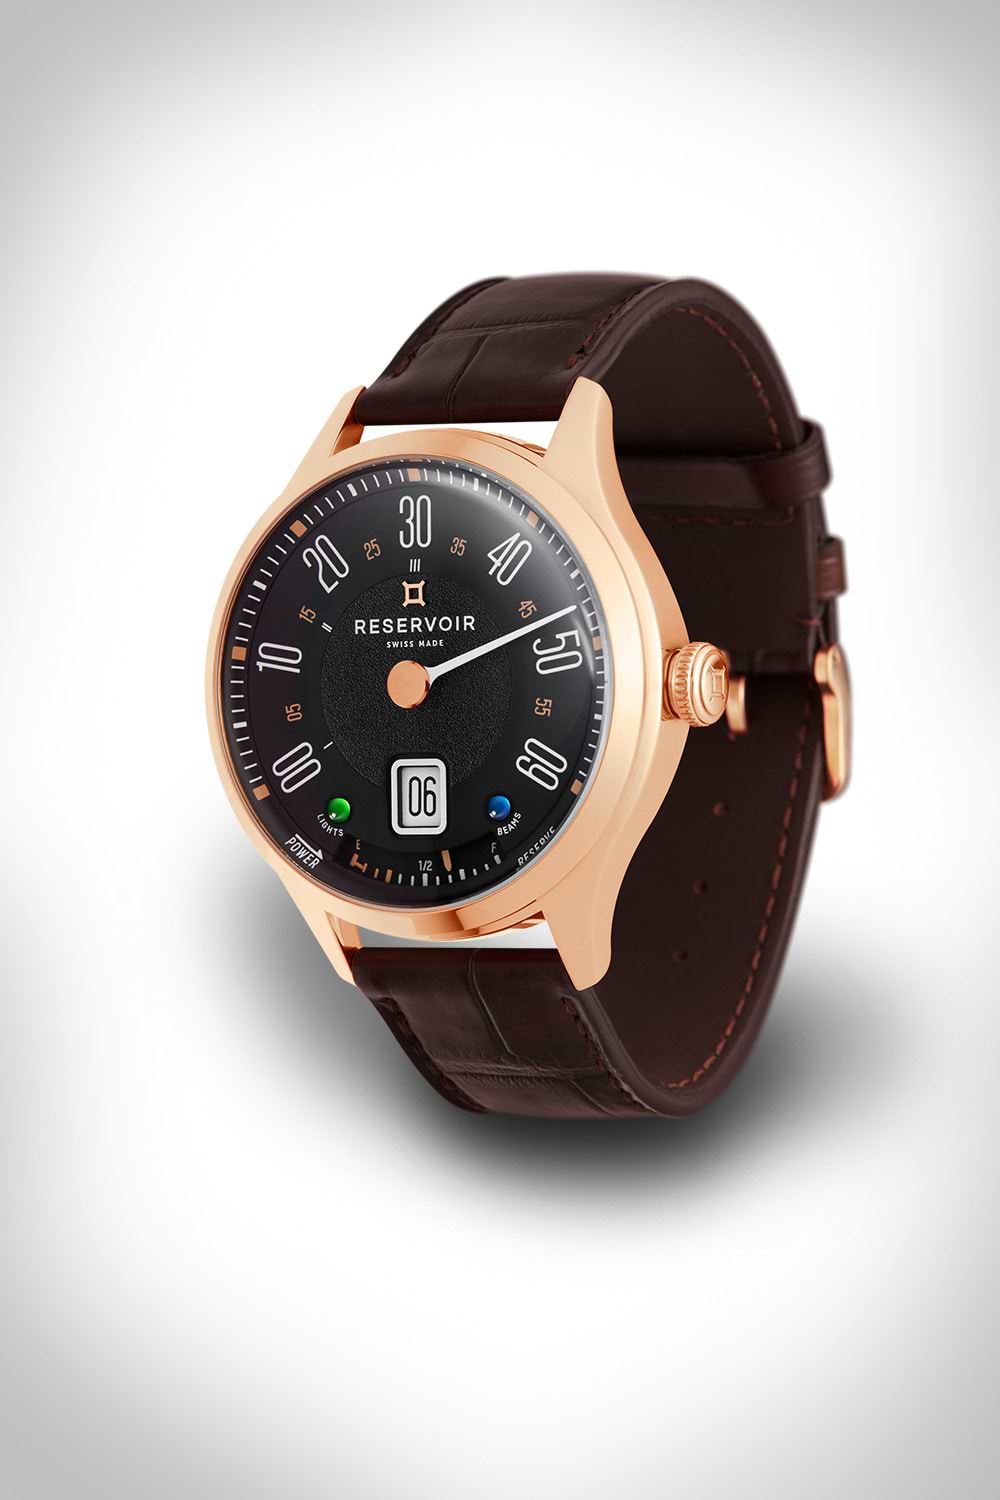 Rose gold wristwatch with brown leather strap, black dial, white numerals, and date display.